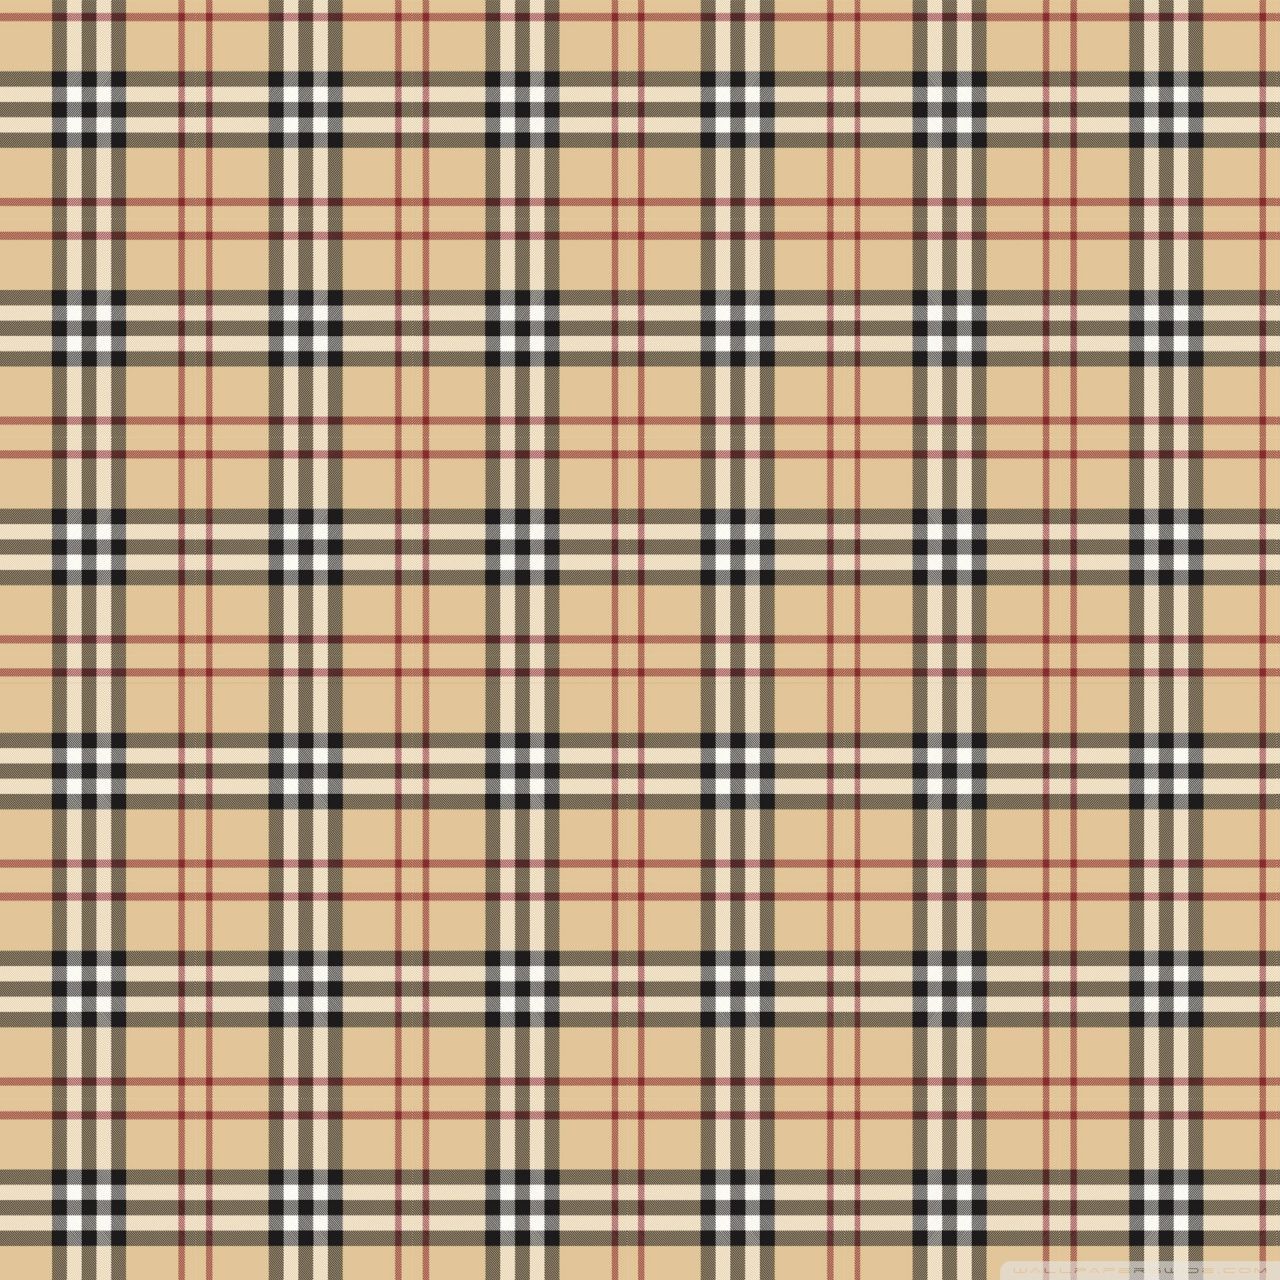 burberry wallpaper by AceOfSpades  Download on ZEDGE  ee40